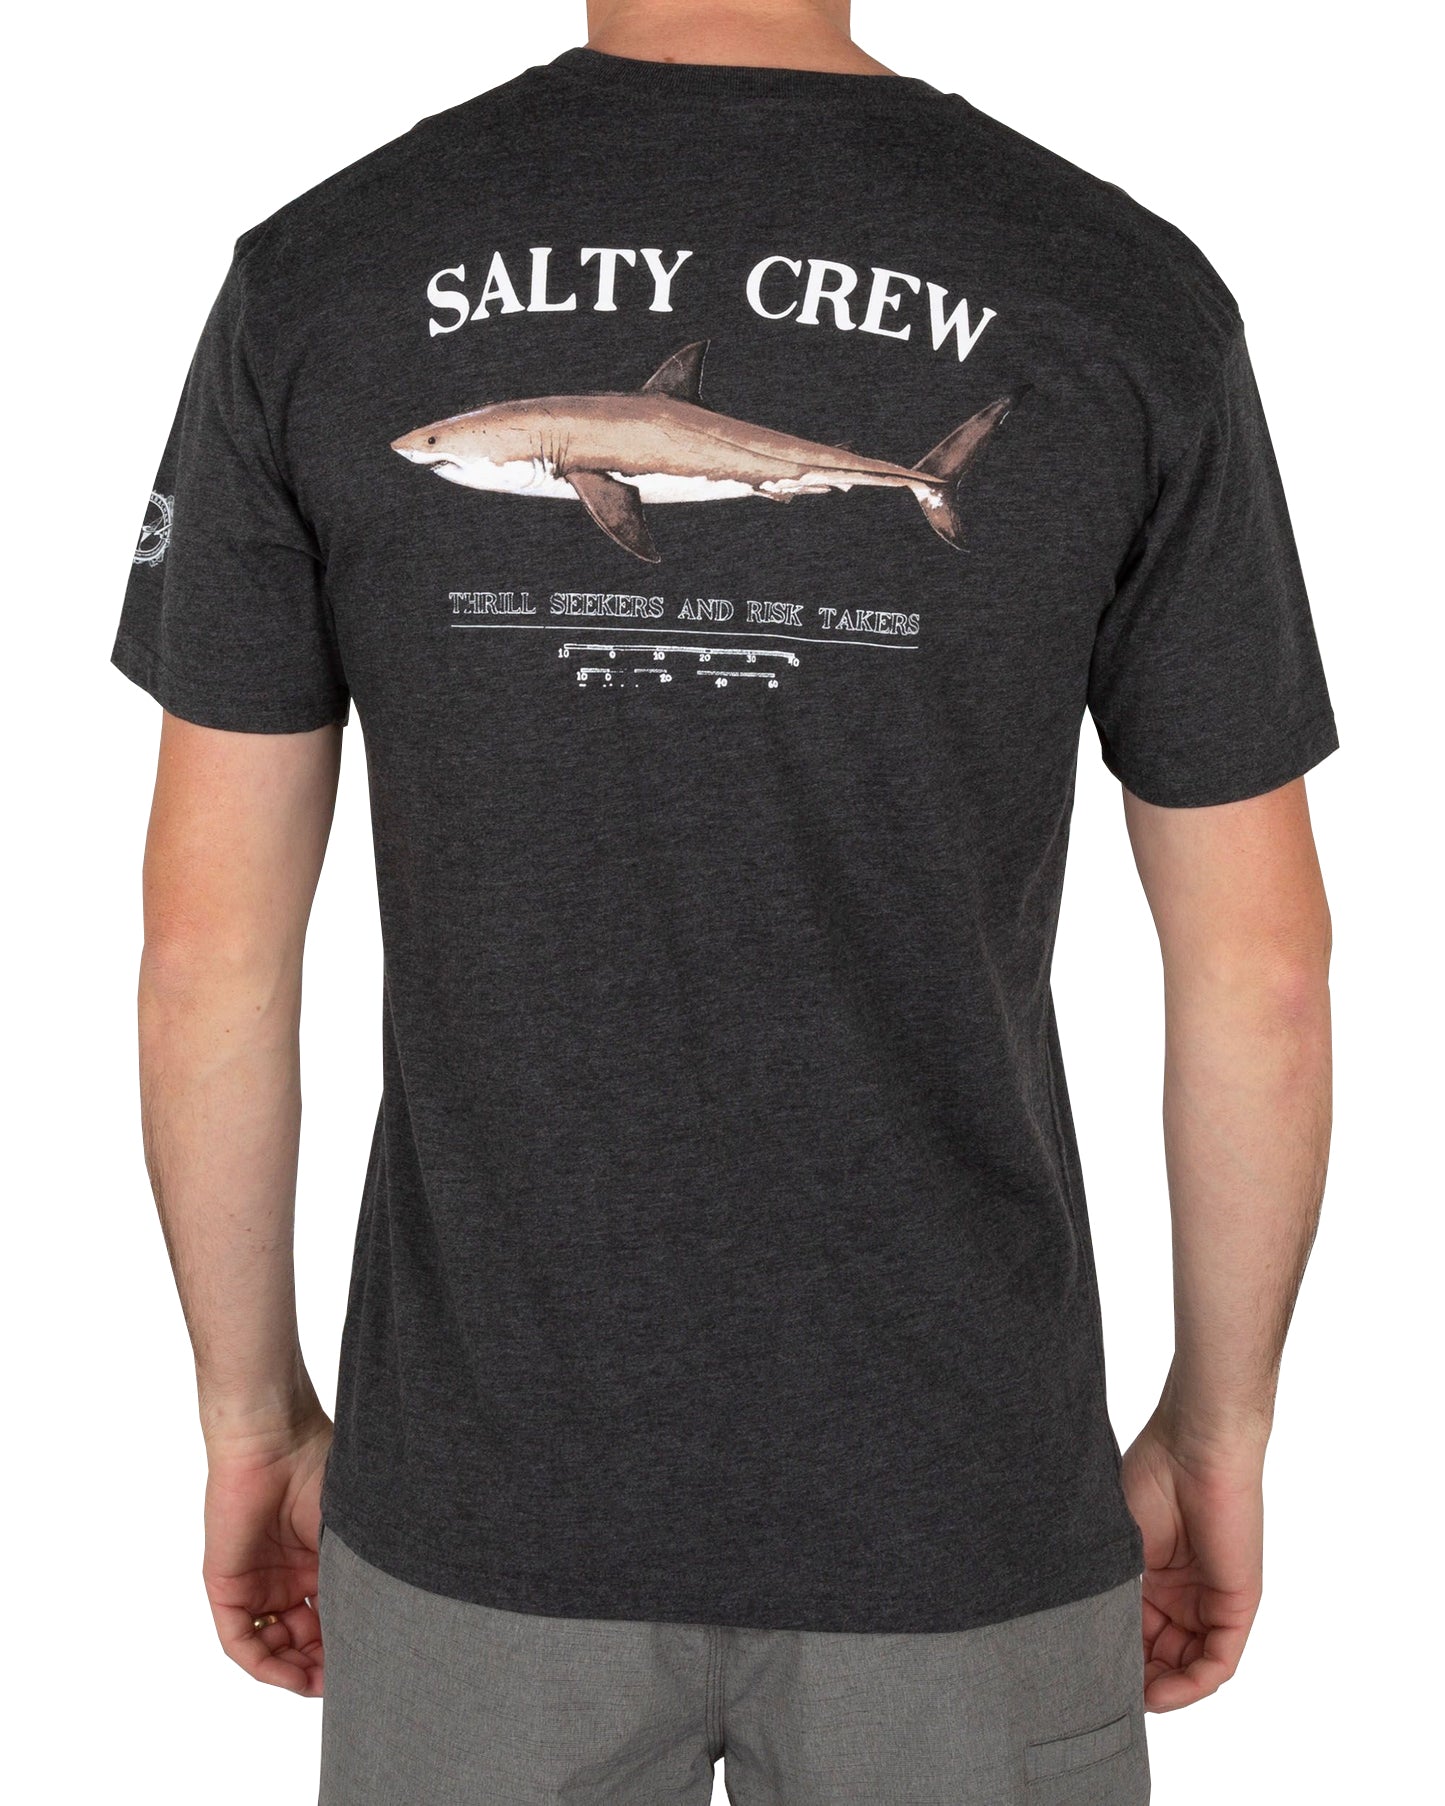 Salty Crew Bruce SS Tee Charcoal HTR XL